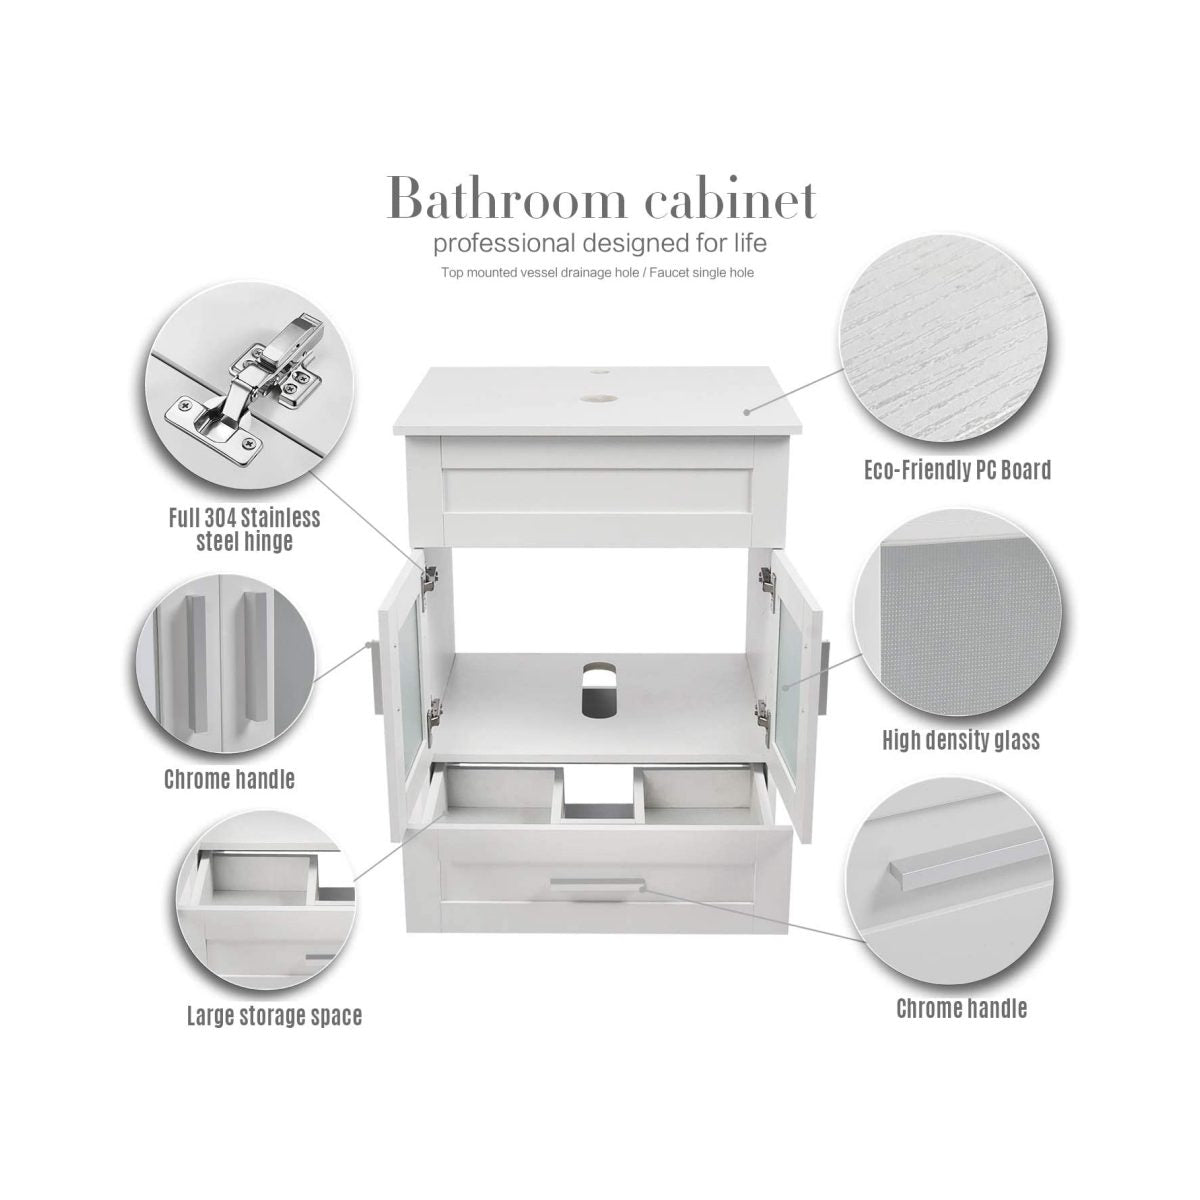 White Bathroom Vanity BA1001-WH features show